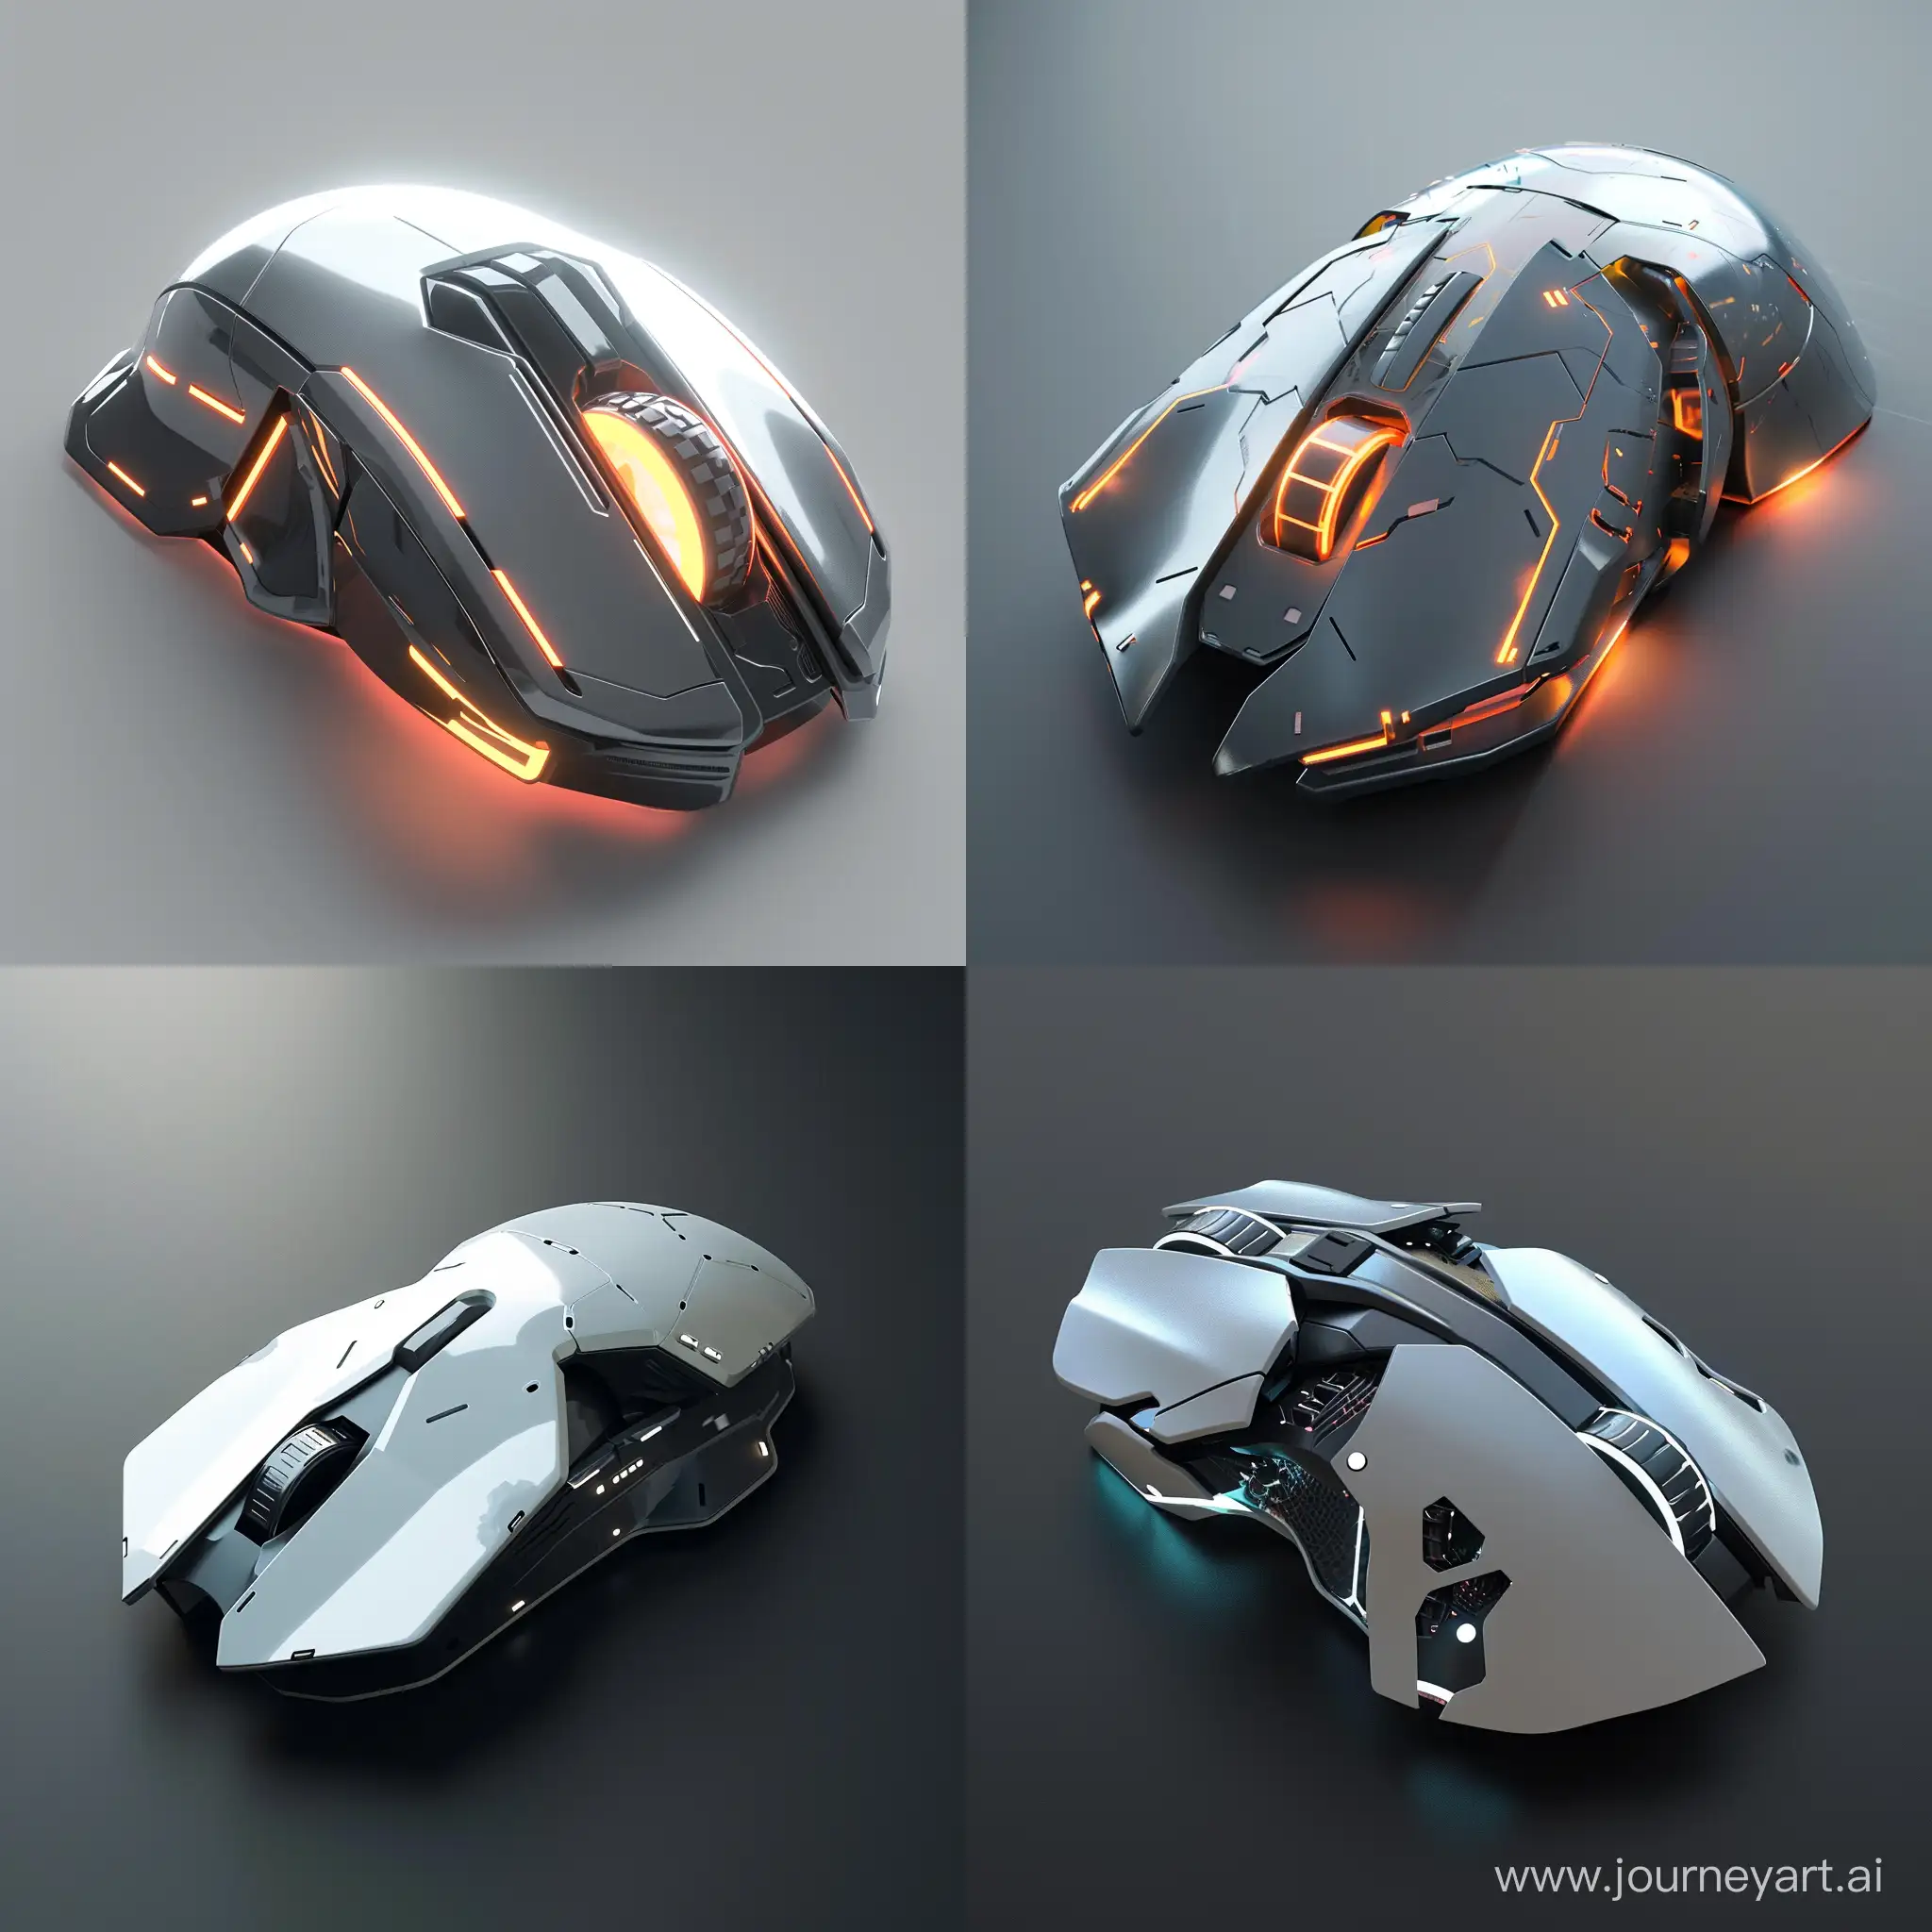 Durable-Futuristic-PC-Mouse-Crafted-from-ImpactResistant-Materials